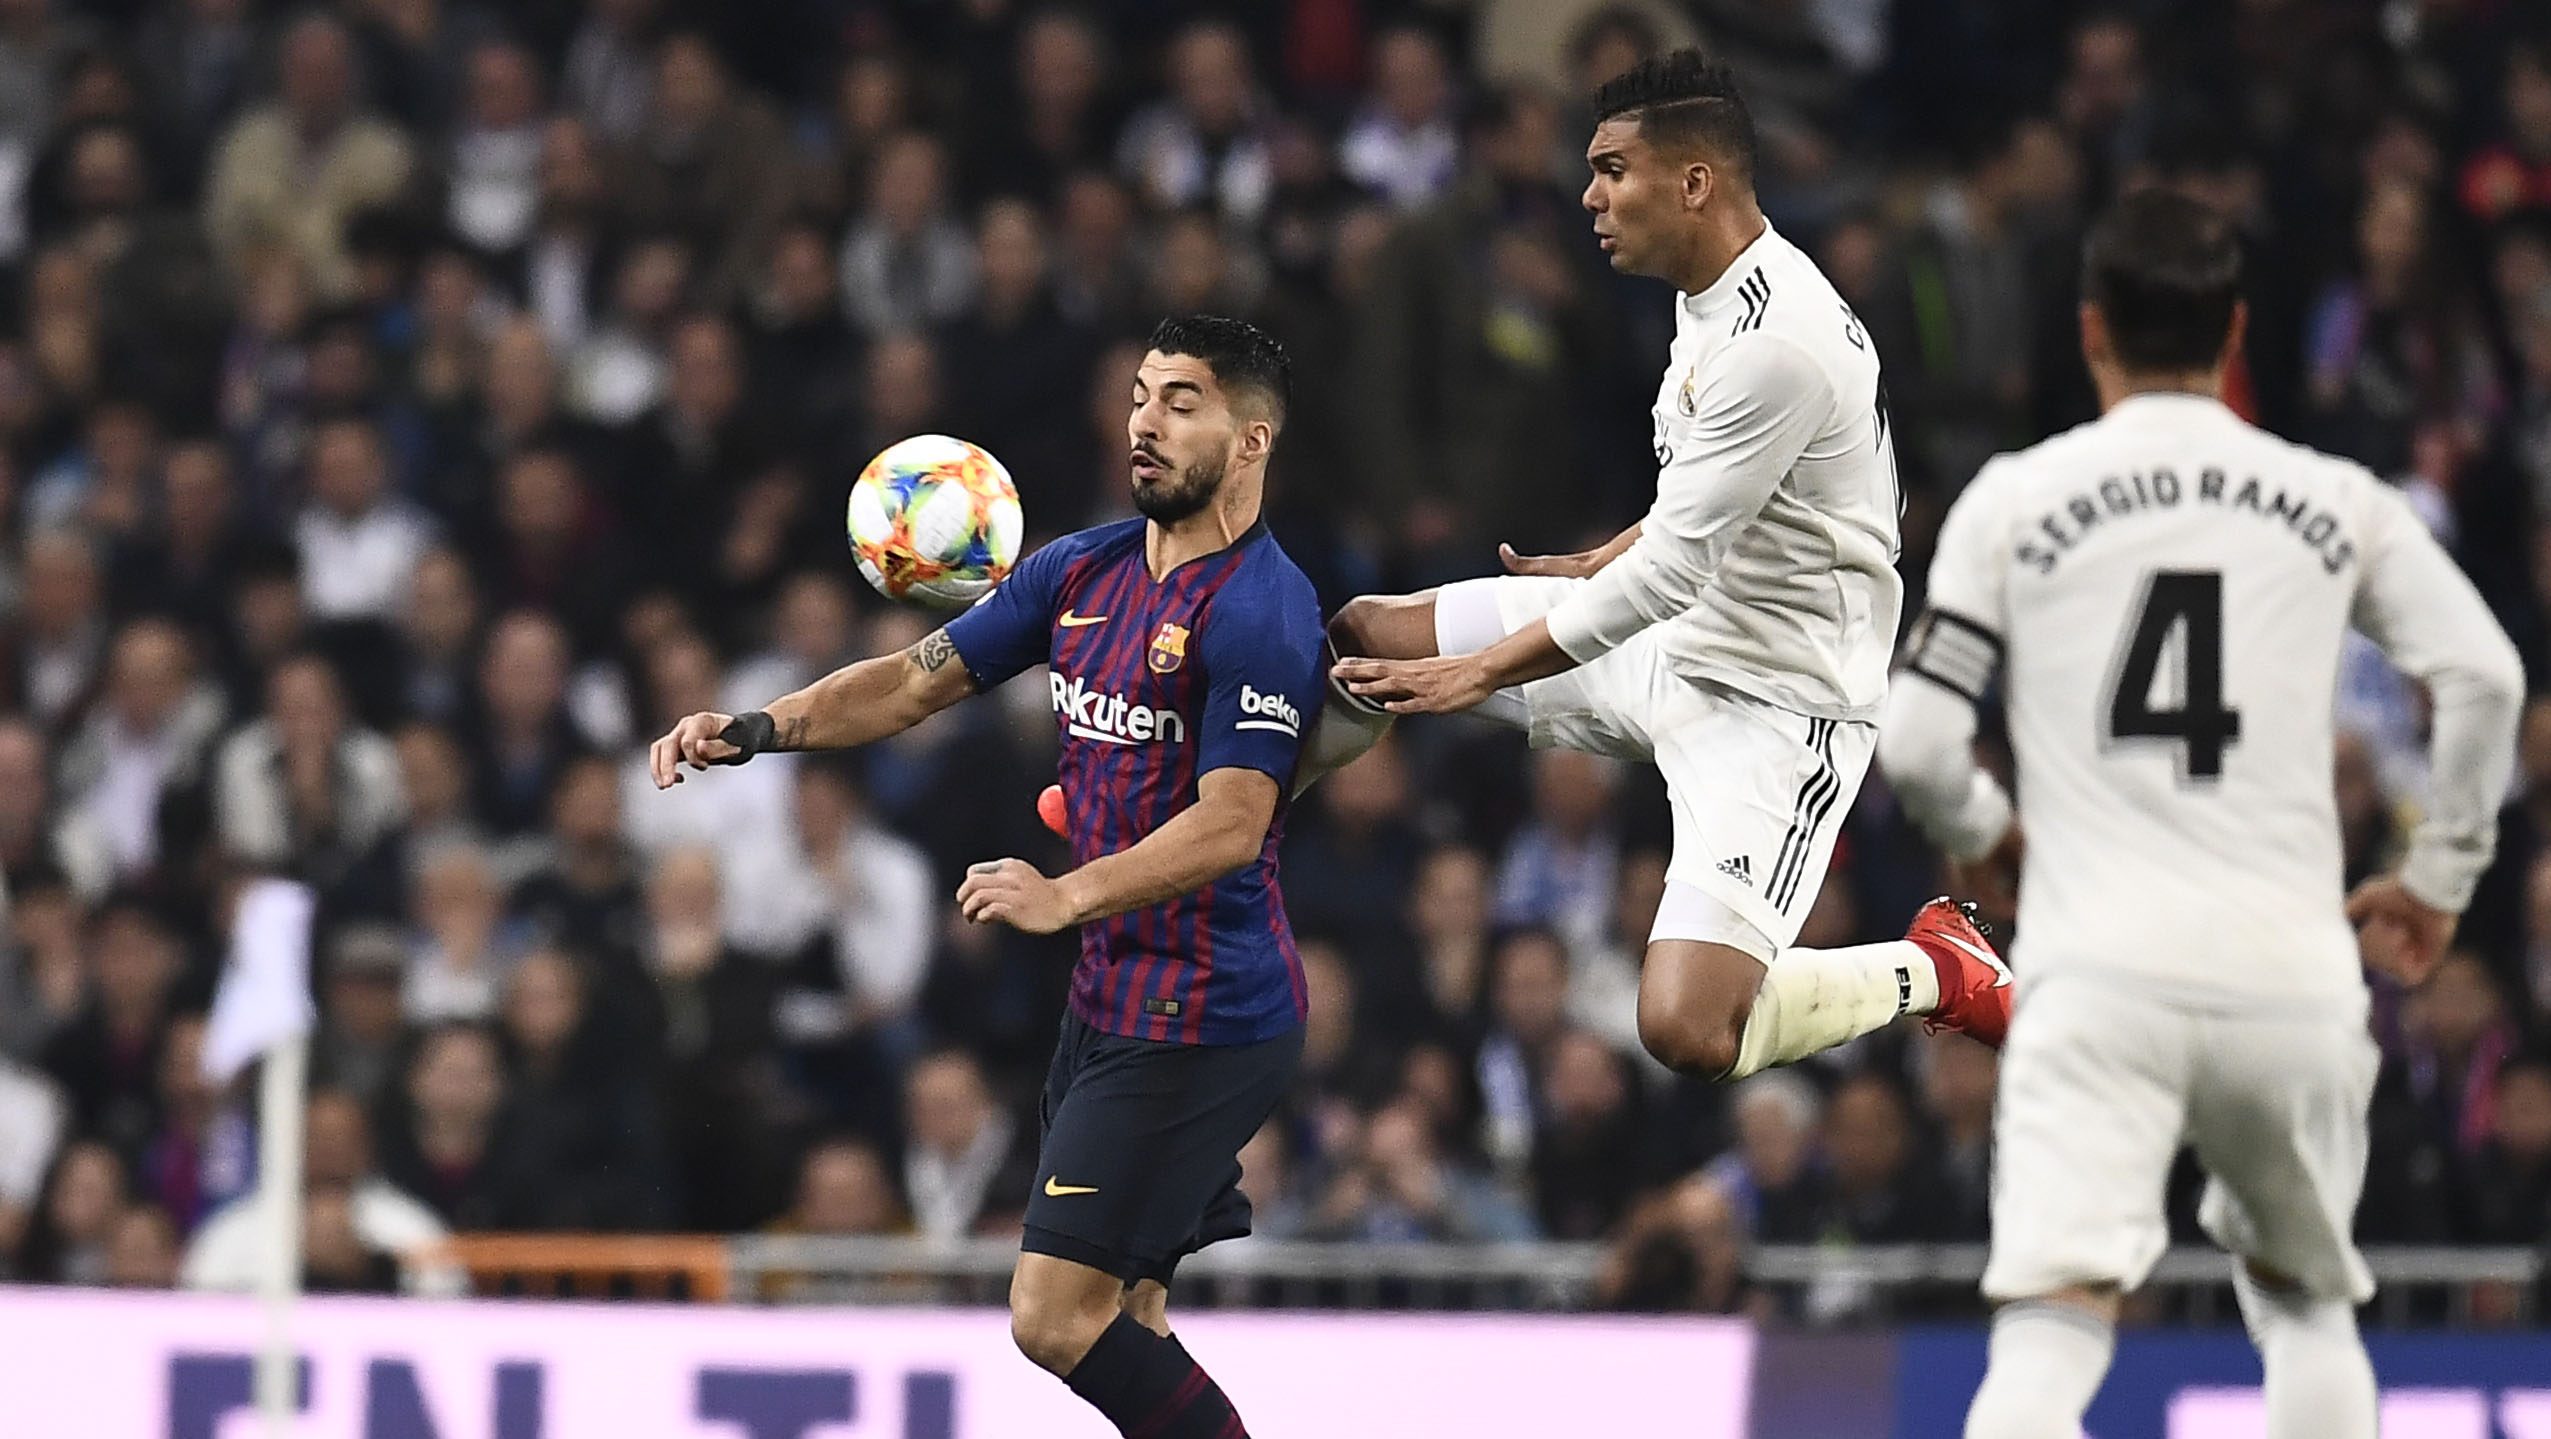 El Clasico 2019 Live Stream How to Watch Online in US